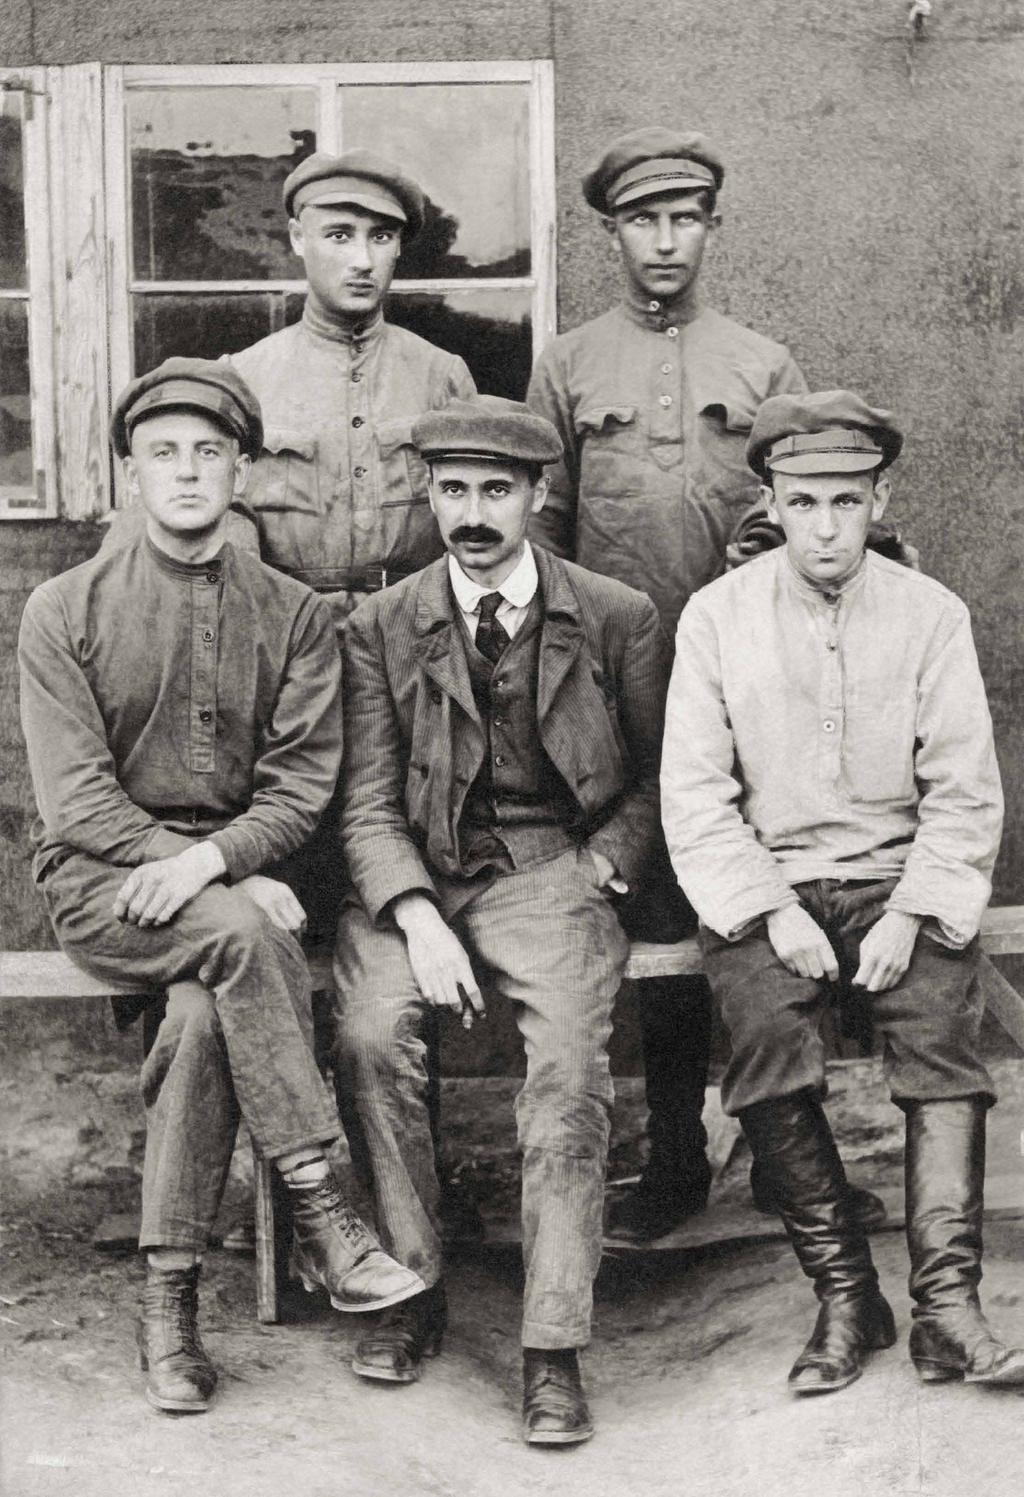 NTEREWEE: PHOTO TAKEN N: NTEREWER: Martin Glas 1917 Lenka Koprivova During World War, my father (standing first from left) served in the Austro-Hungarian army at the Russian front; he made it as far